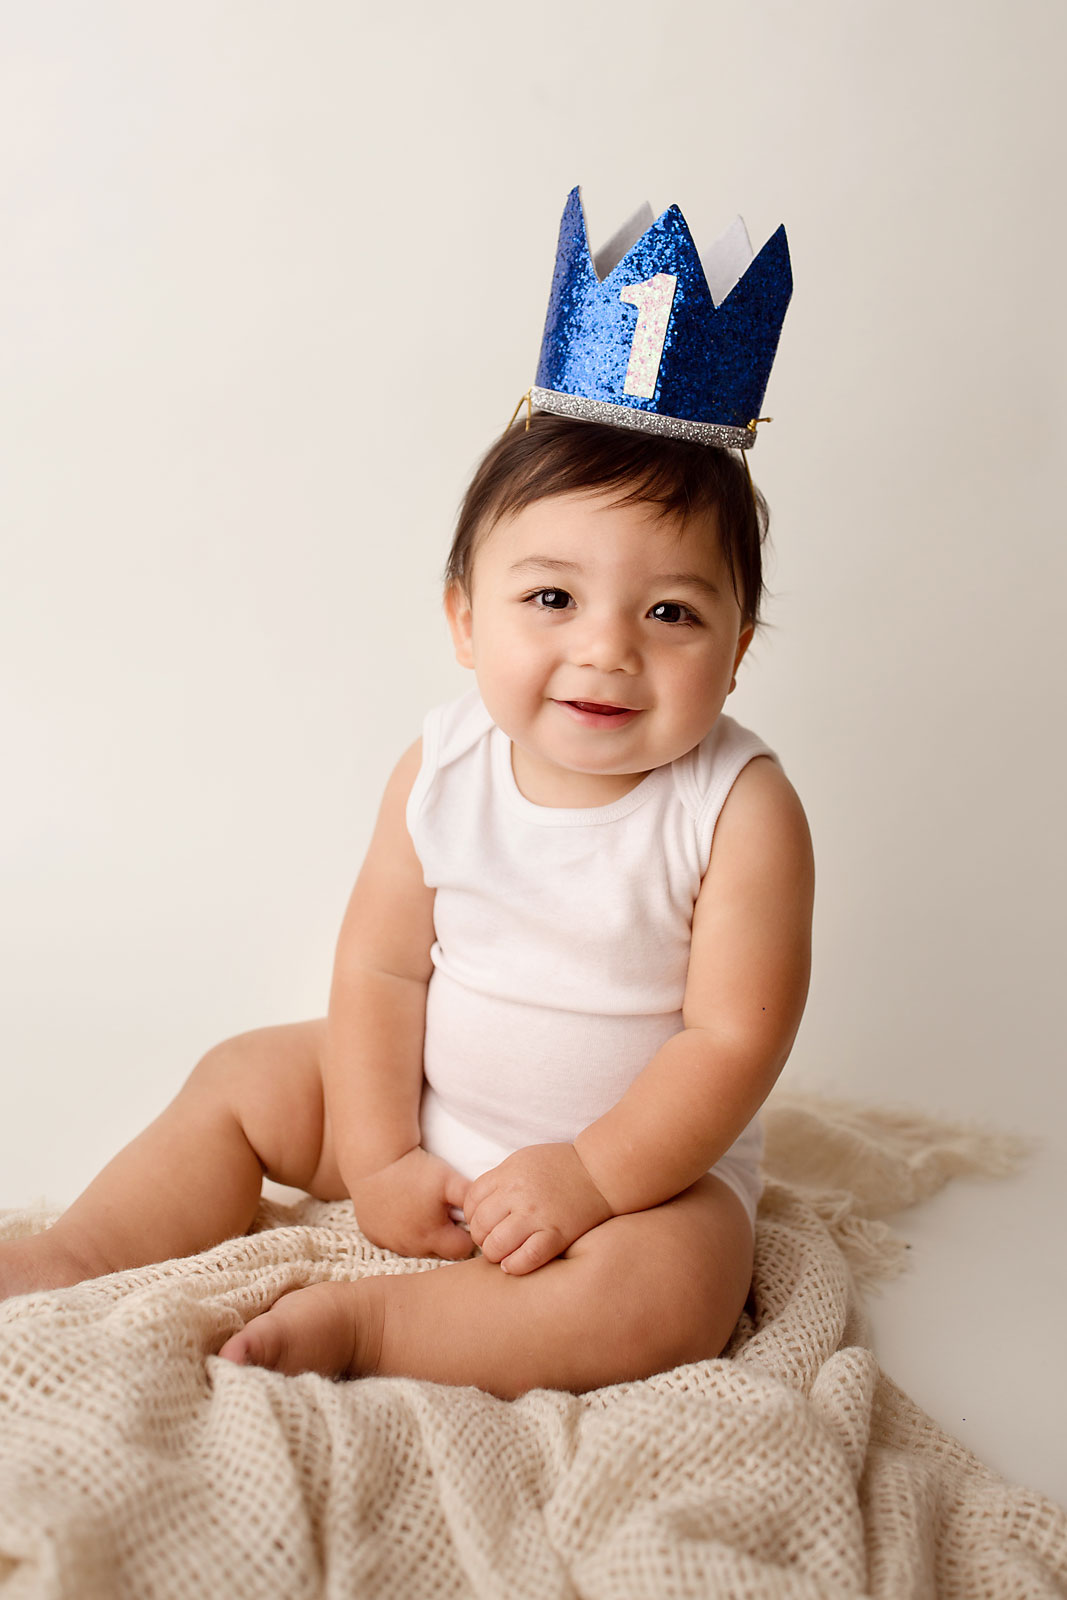 baby's first birthday photographer nj, smiling toddler boy with blue crown